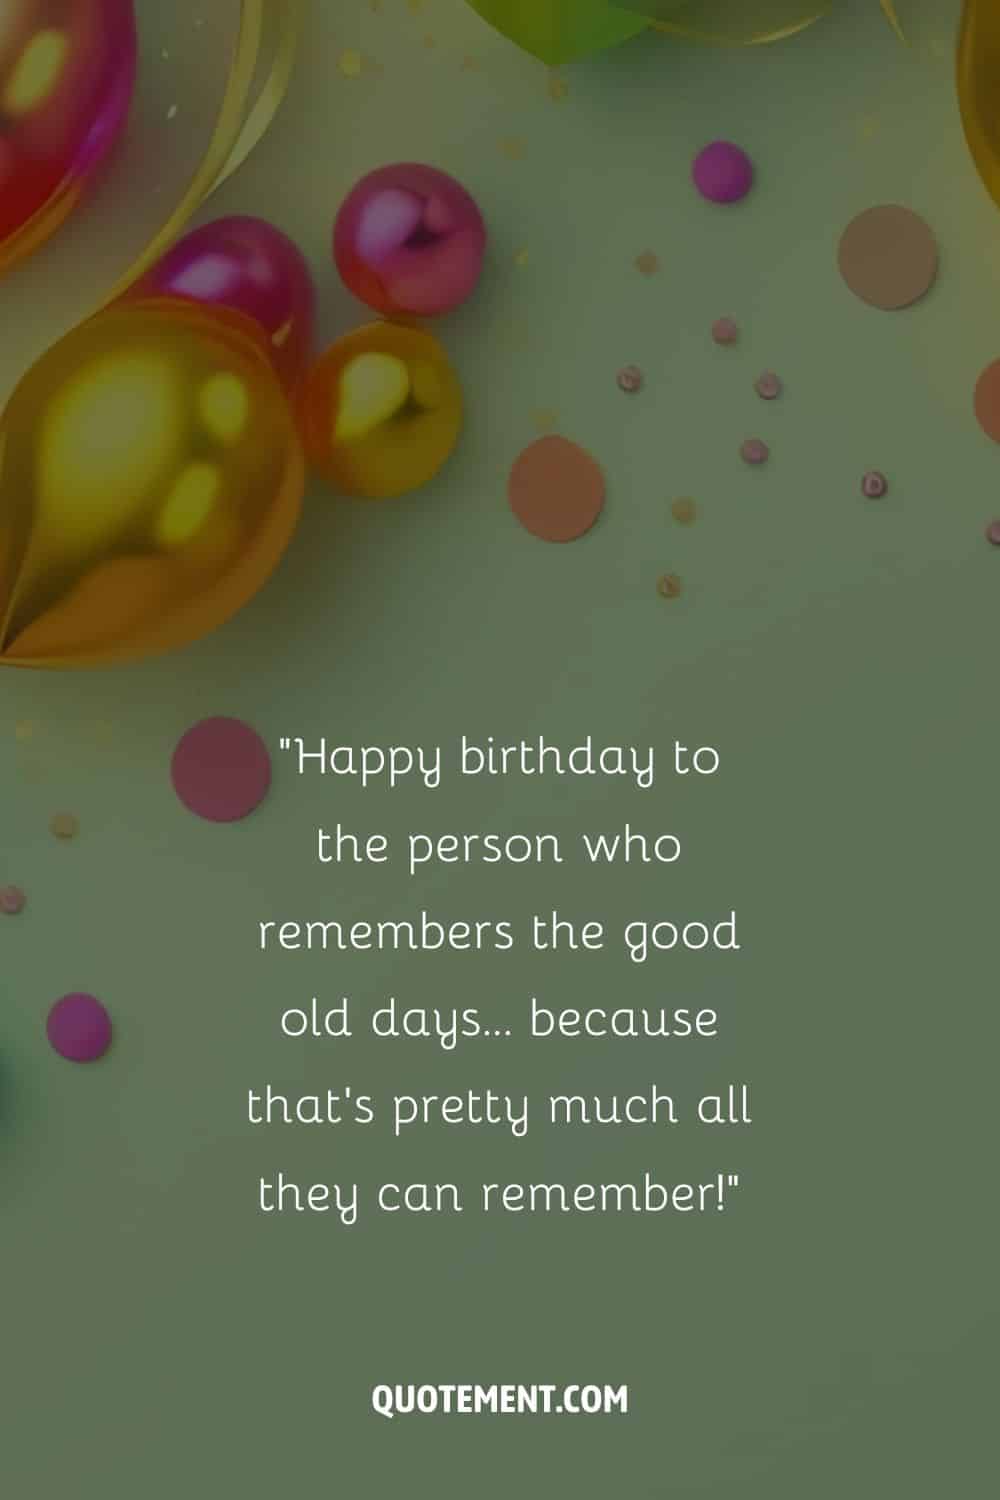 Funny message for their 97th birthday and colorful balloons along with confetti in the background
